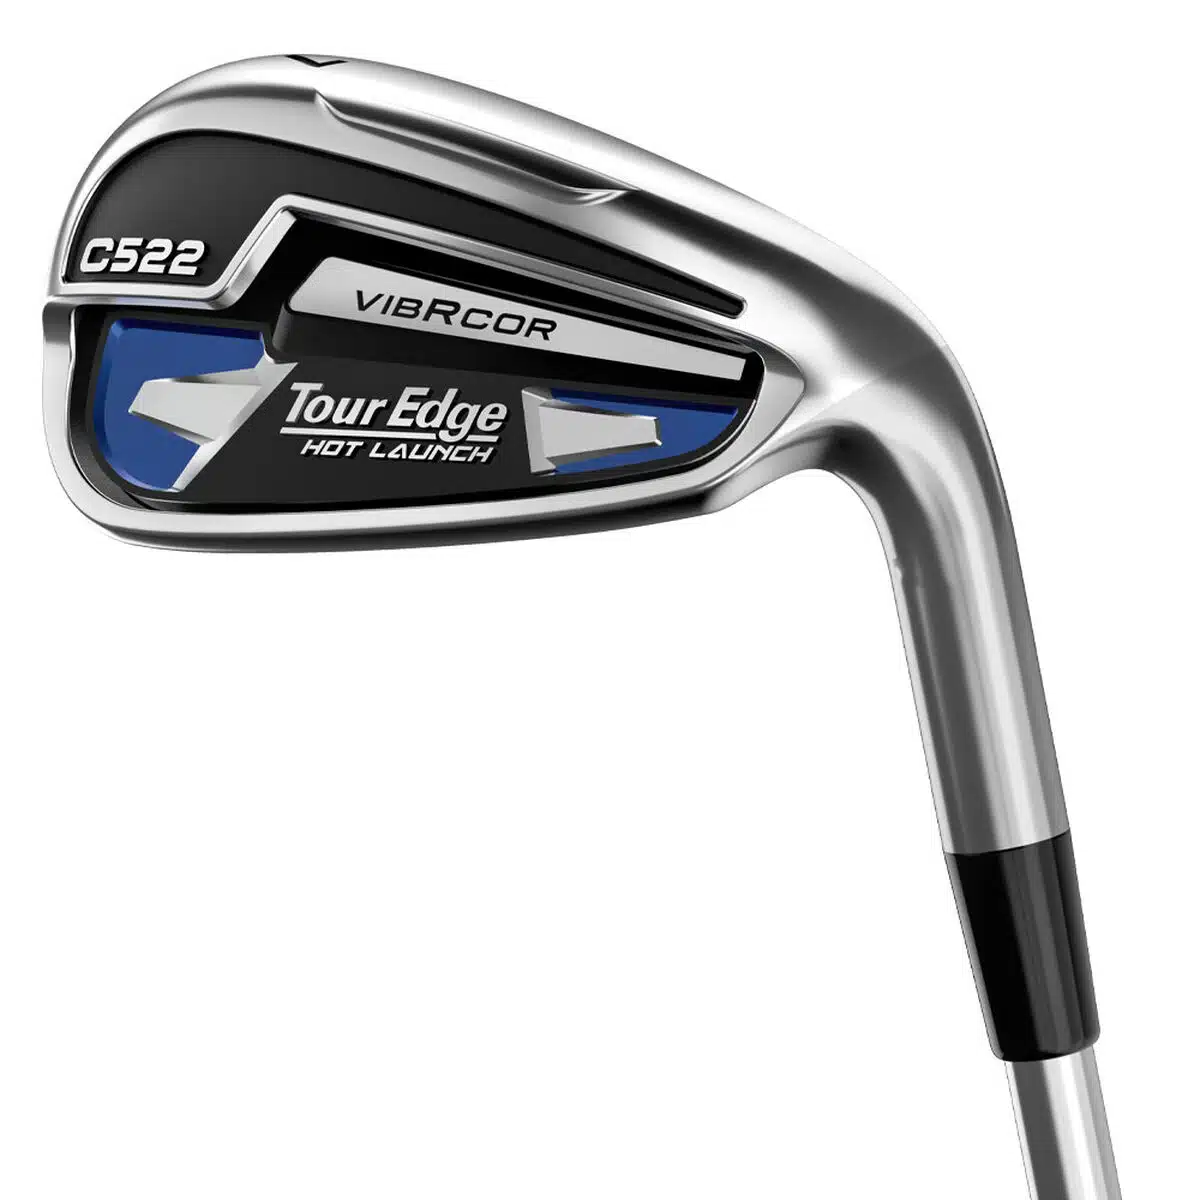 Hot launch pitching wedge